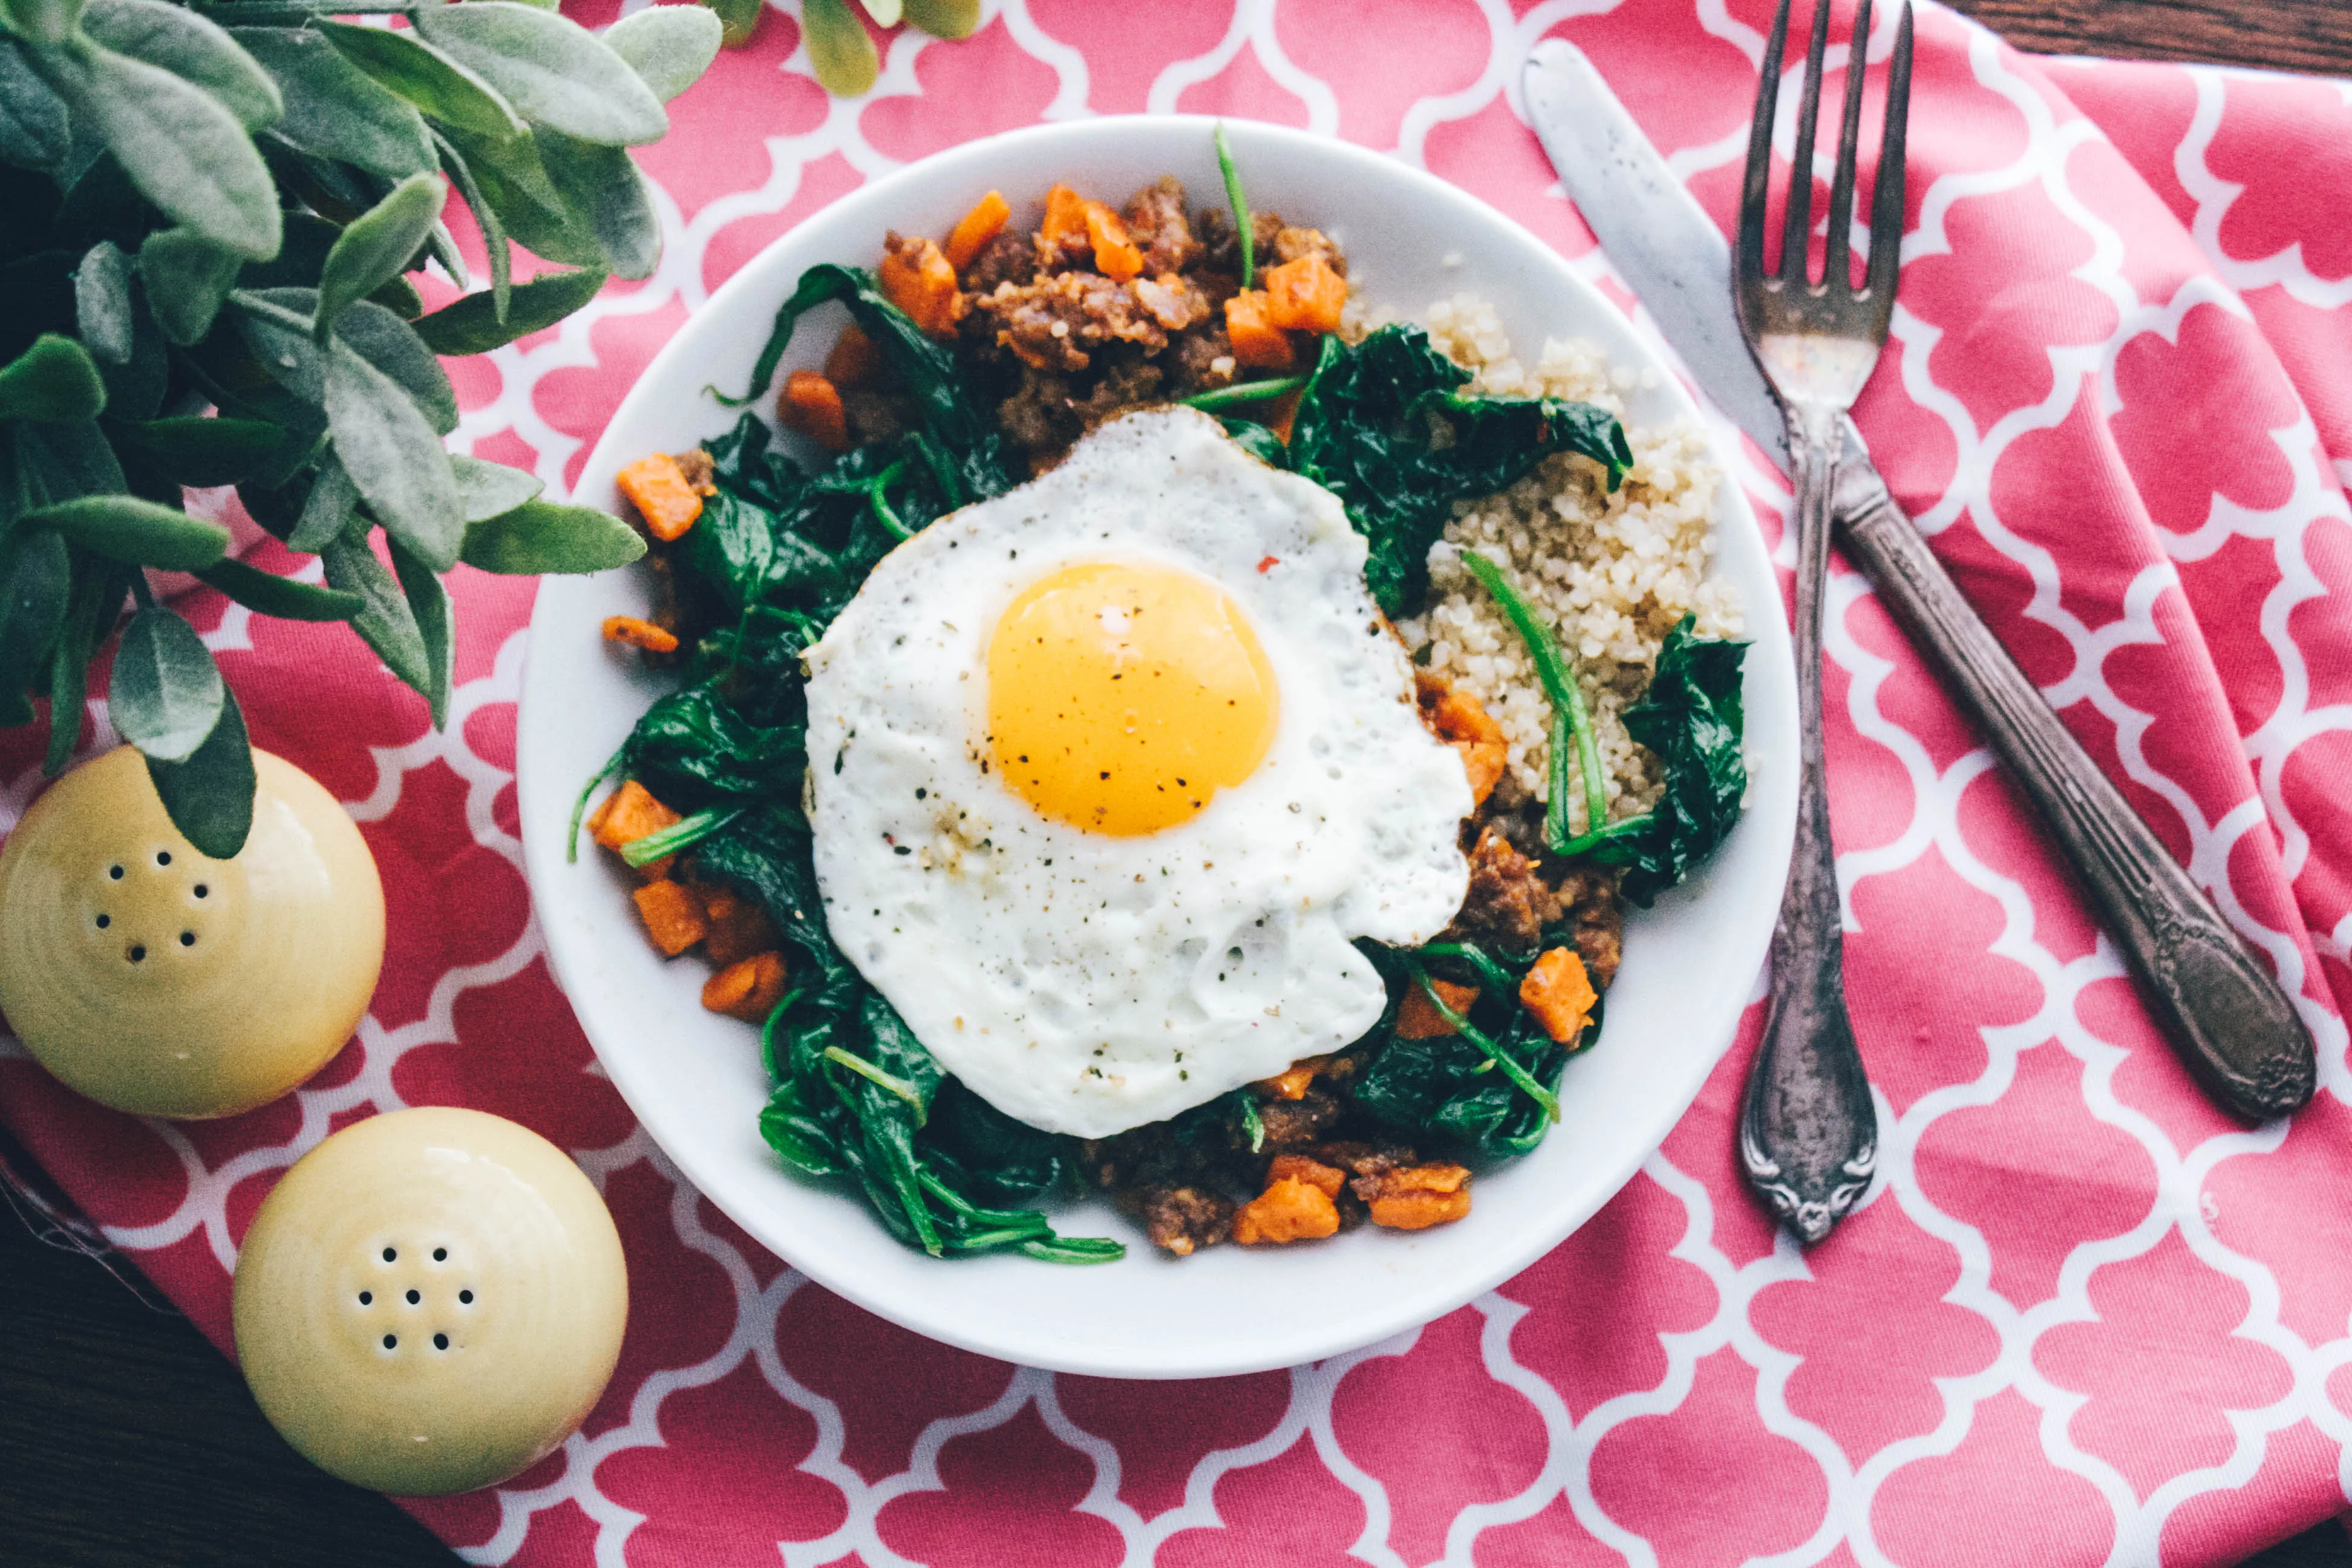 Sausage, Sweet Potato & Spinach Quinoa Bowls with Egg are a delightful dish for any meal. Make these Sausage, Sweet Potato & Spinach Quinoa Bowls with Egg soon!